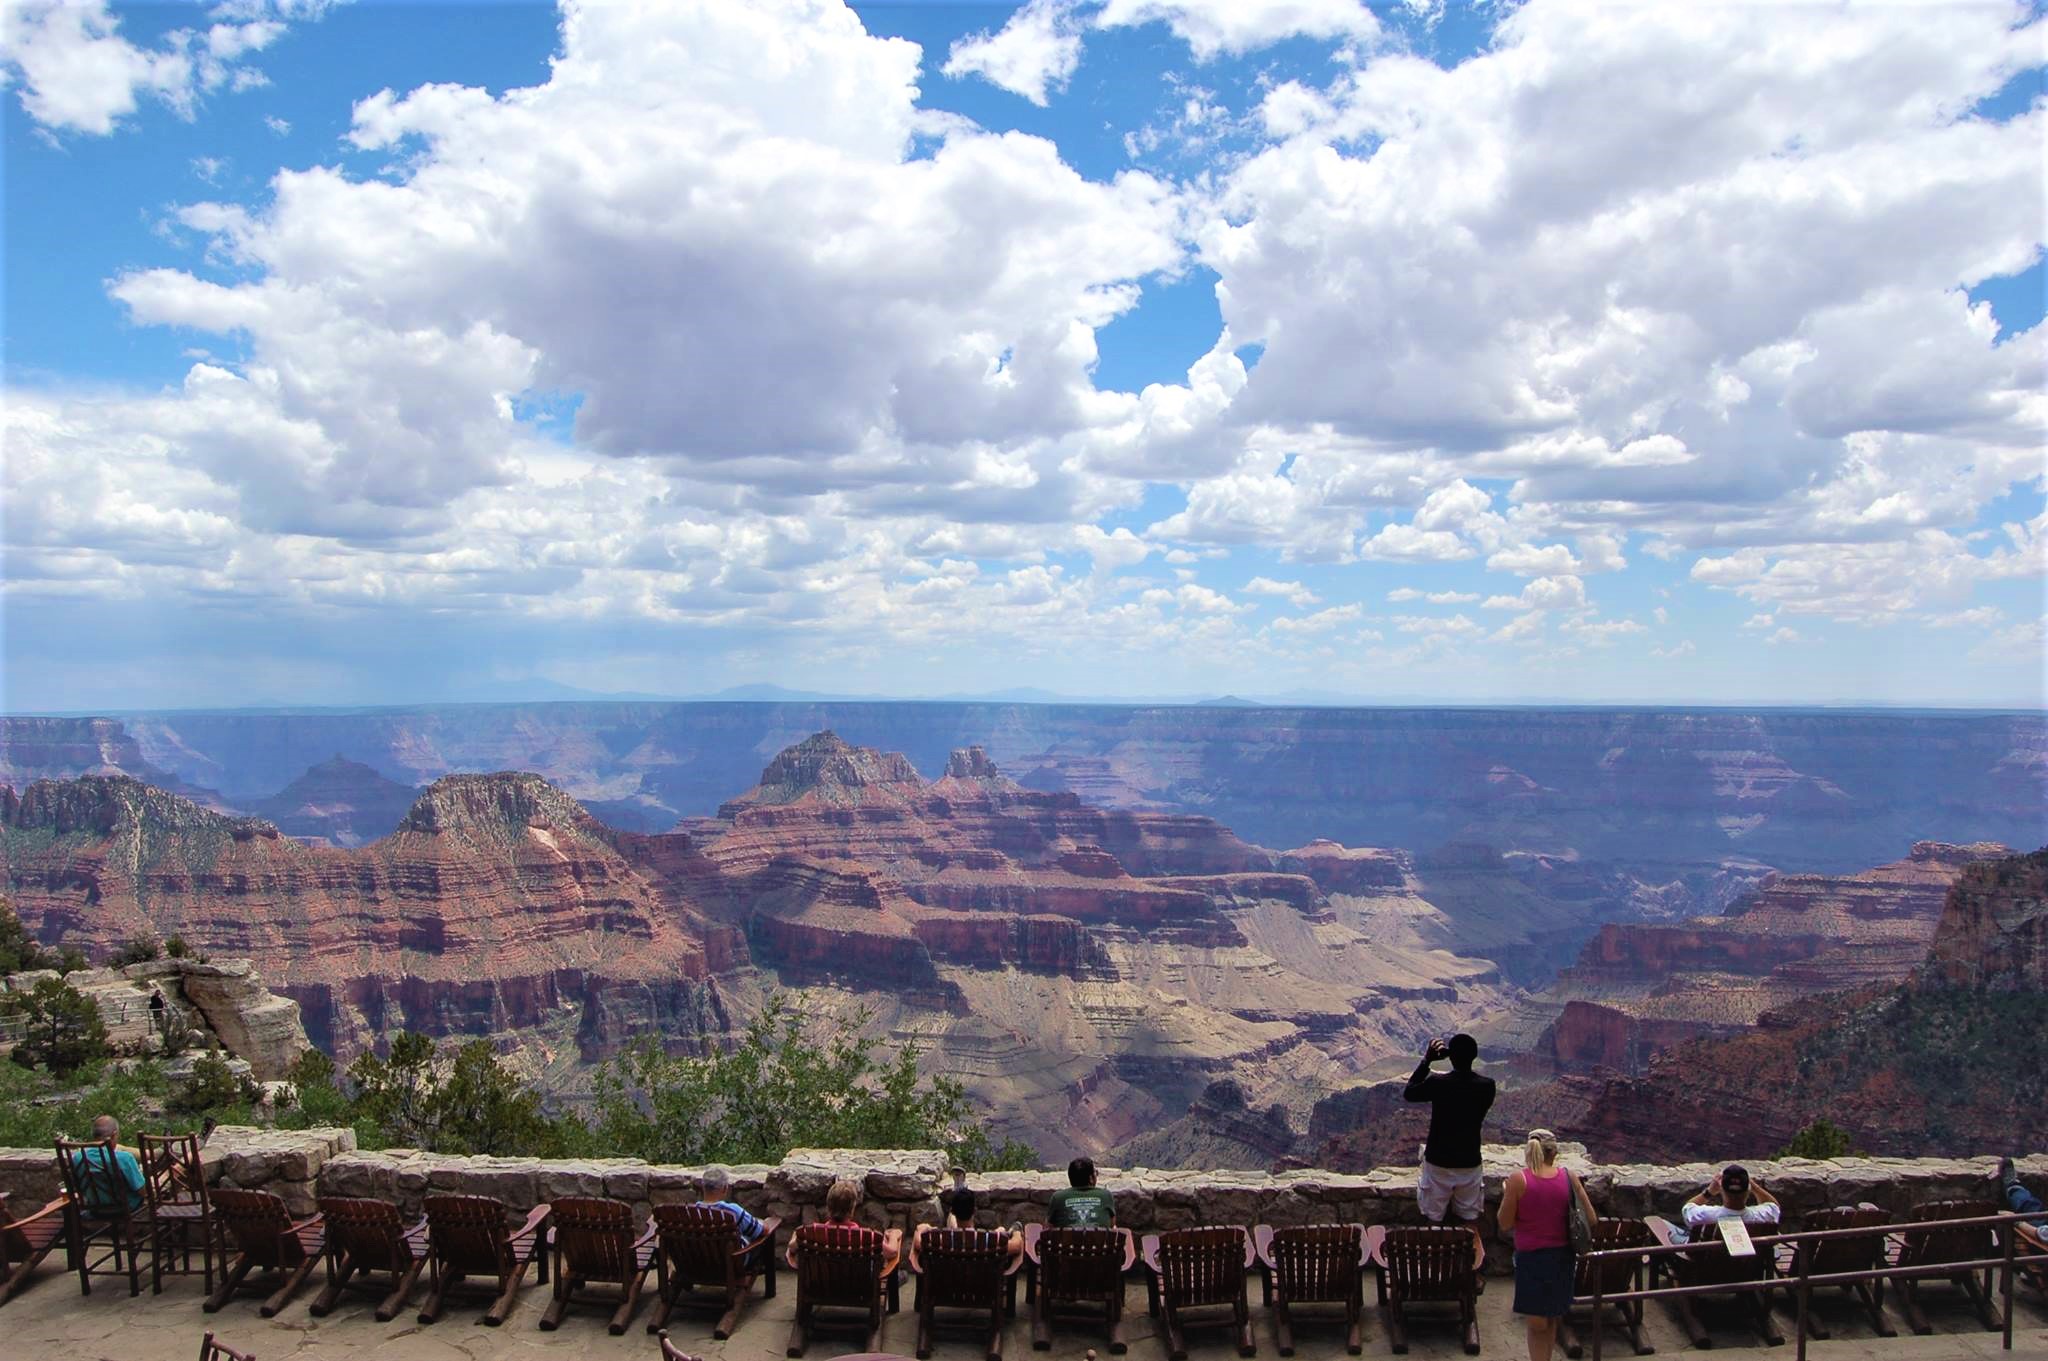 Visitors sit on chairs overlooking a canyon landscape from the North Rim Lodge